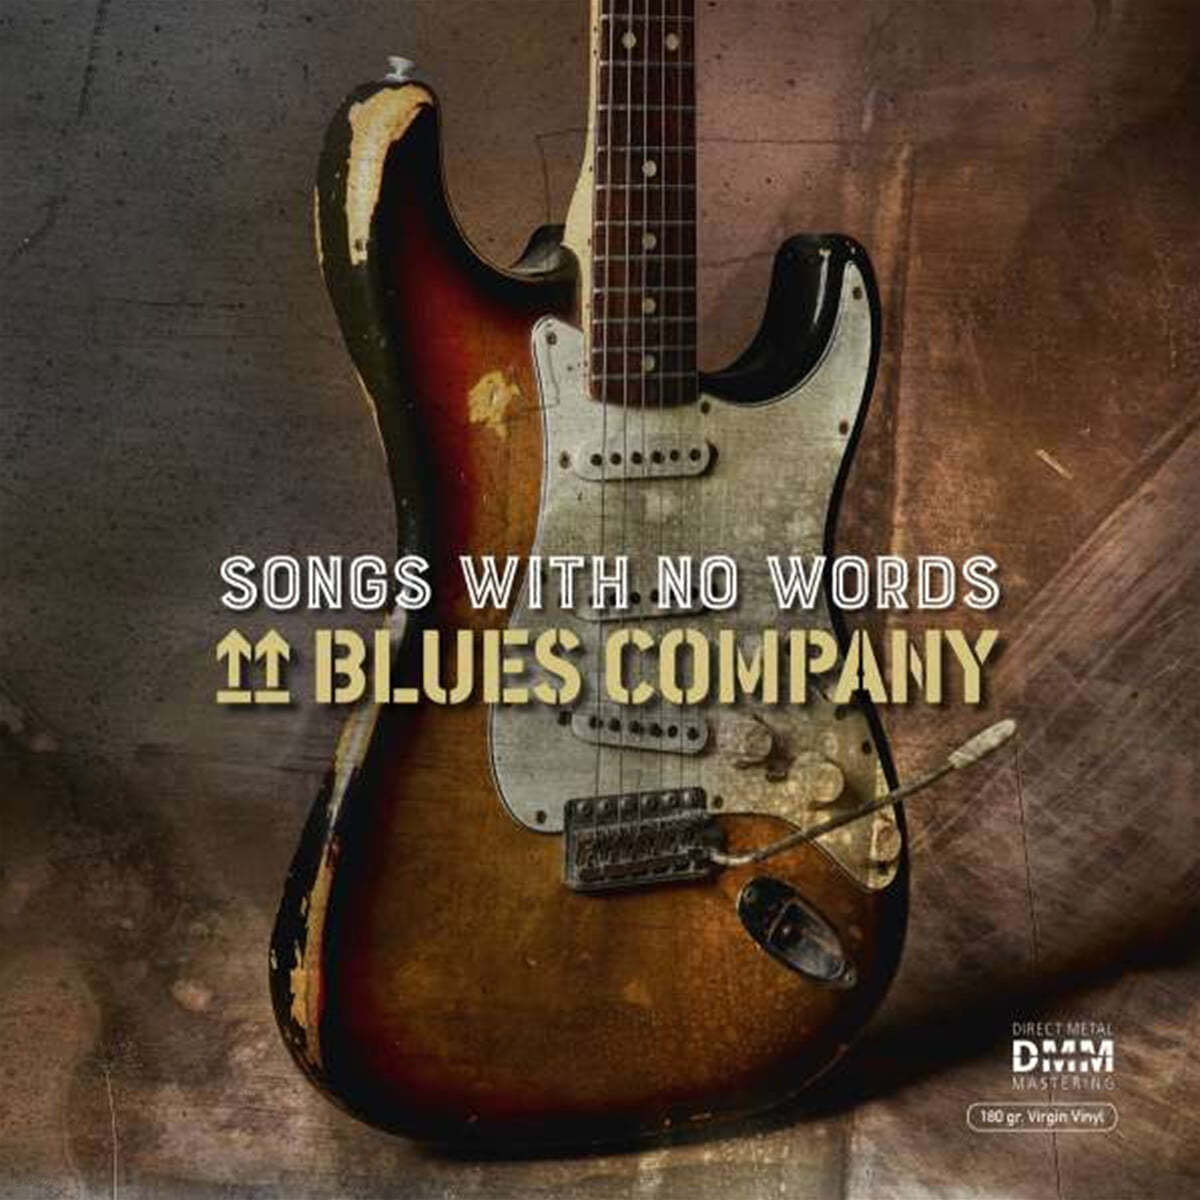 Blues Company (블루스 컴퍼니) - Songs With No Words [2LP] 